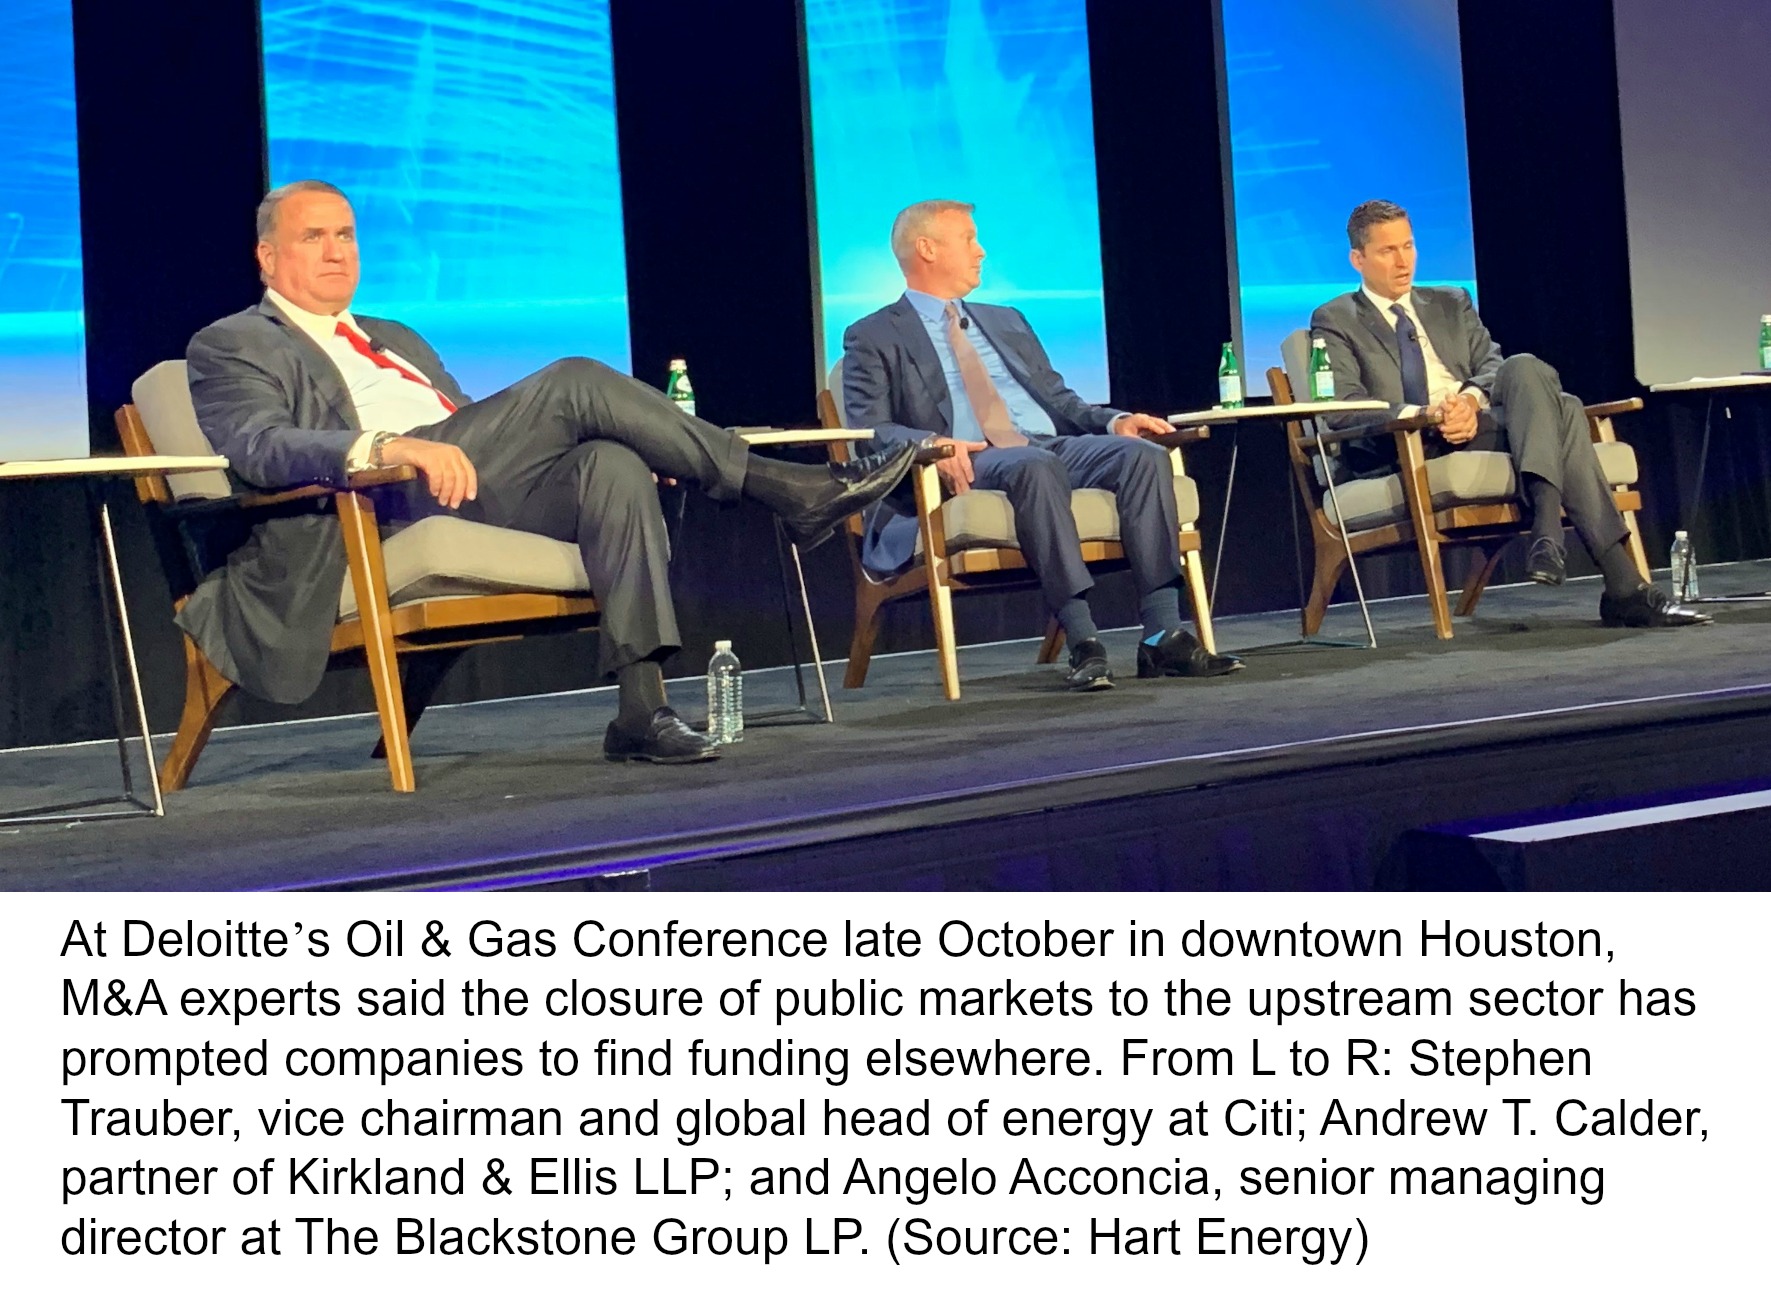 From L to R: Stephen Trauber, vice chairman and global head of energy at Citi; Andrew T. Calder, partner of Kirkland & Ellis LLP; and Angelo Acconcia, senior managing director at The Blackstone Group LP. (Source: Hart Energy)